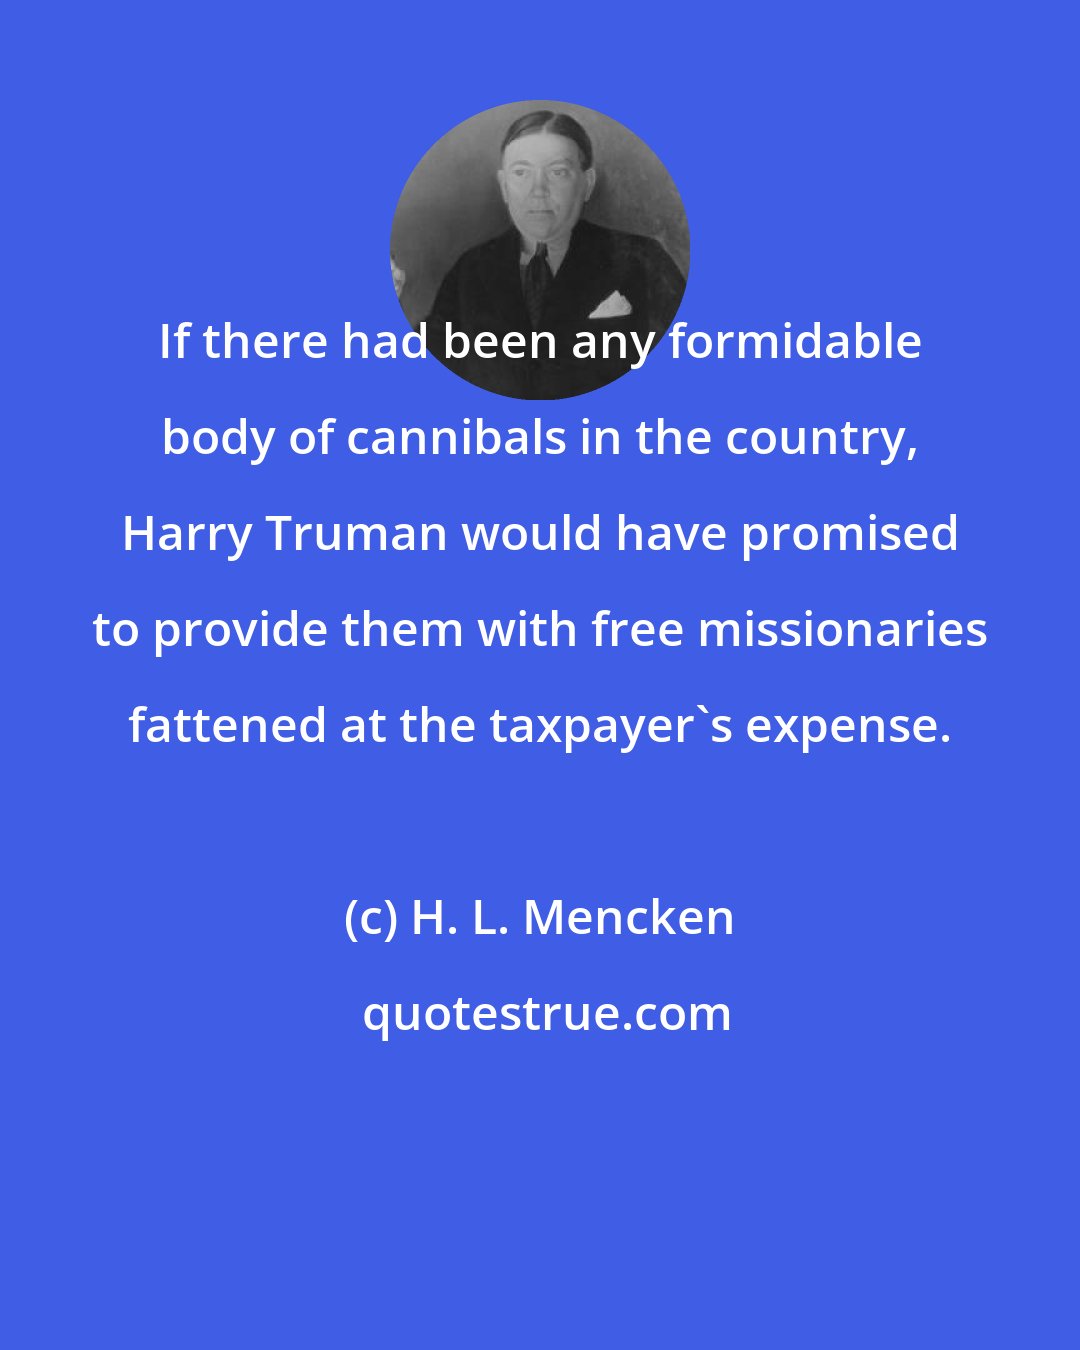 H. L. Mencken: If there had been any formidable body of cannibals in the country, Harry Truman would have promised to provide them with free missionaries fattened at the taxpayer's expense.